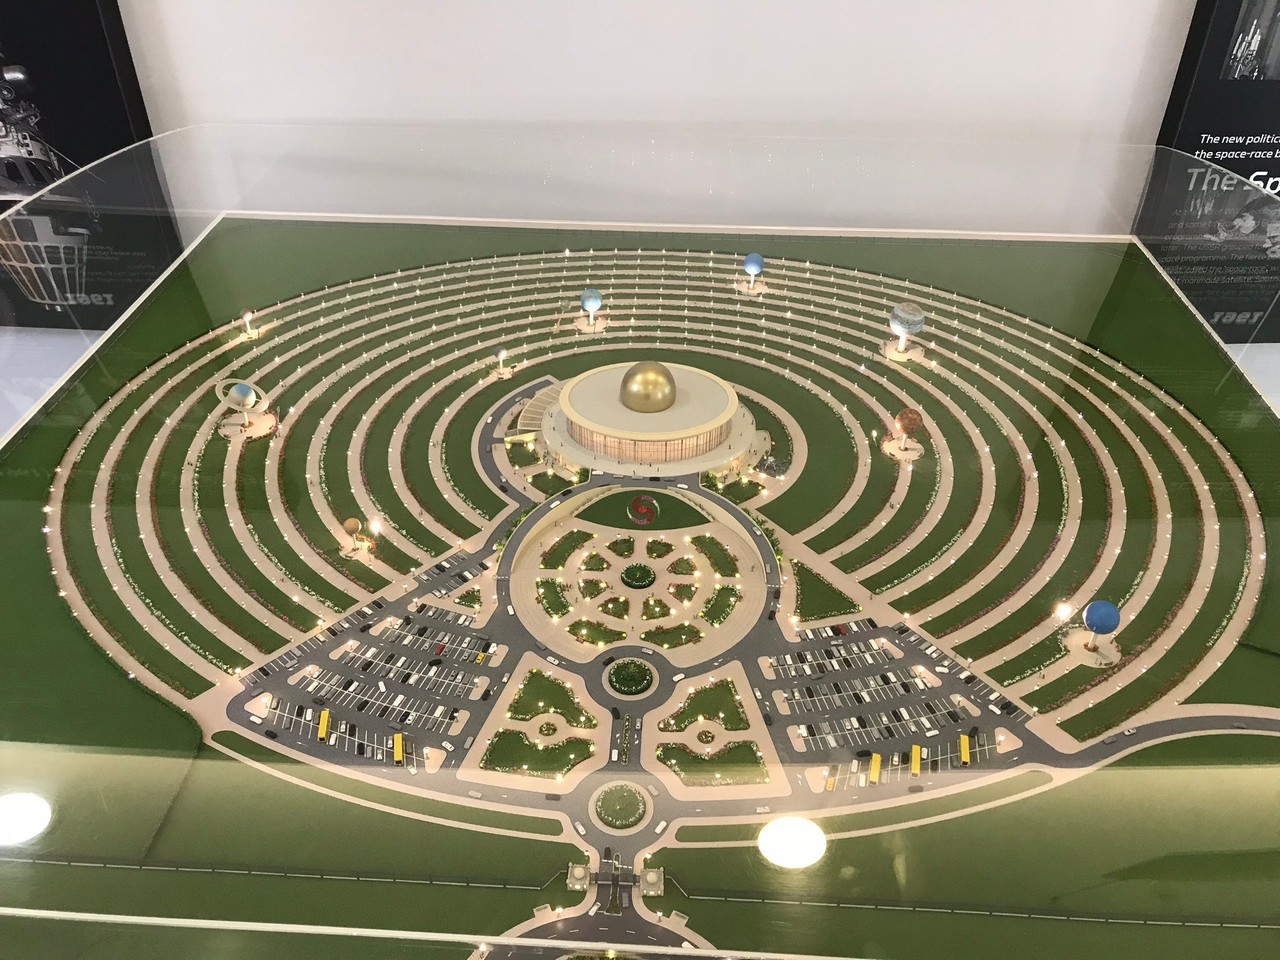 model of Sharjah planetarium, Sharjah centre for space sciences and astronomy